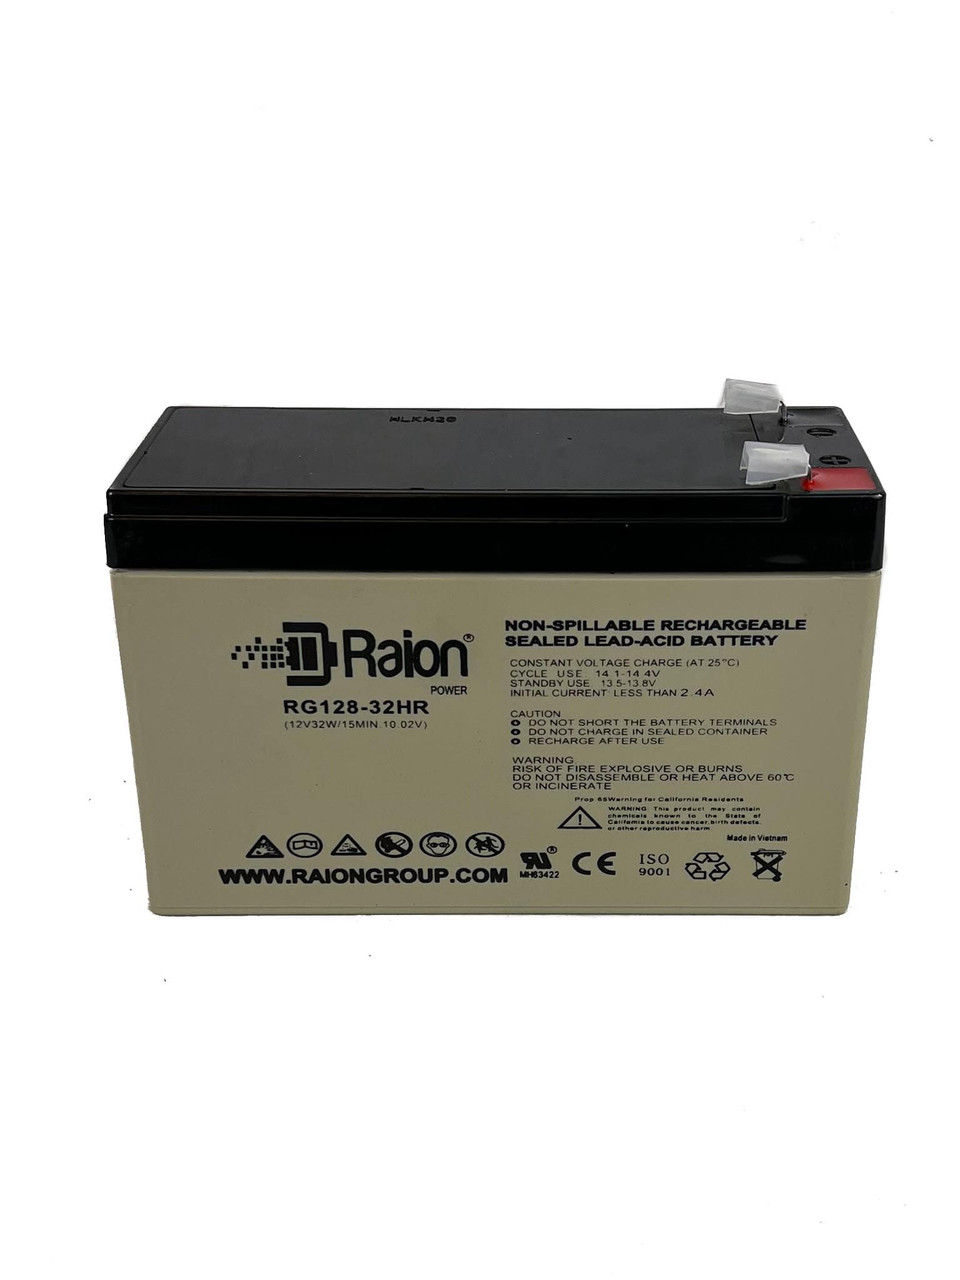 Raion Power RG128-32HR Replacement High Rate Battery Cartridge for Belkin F6C750spAVR